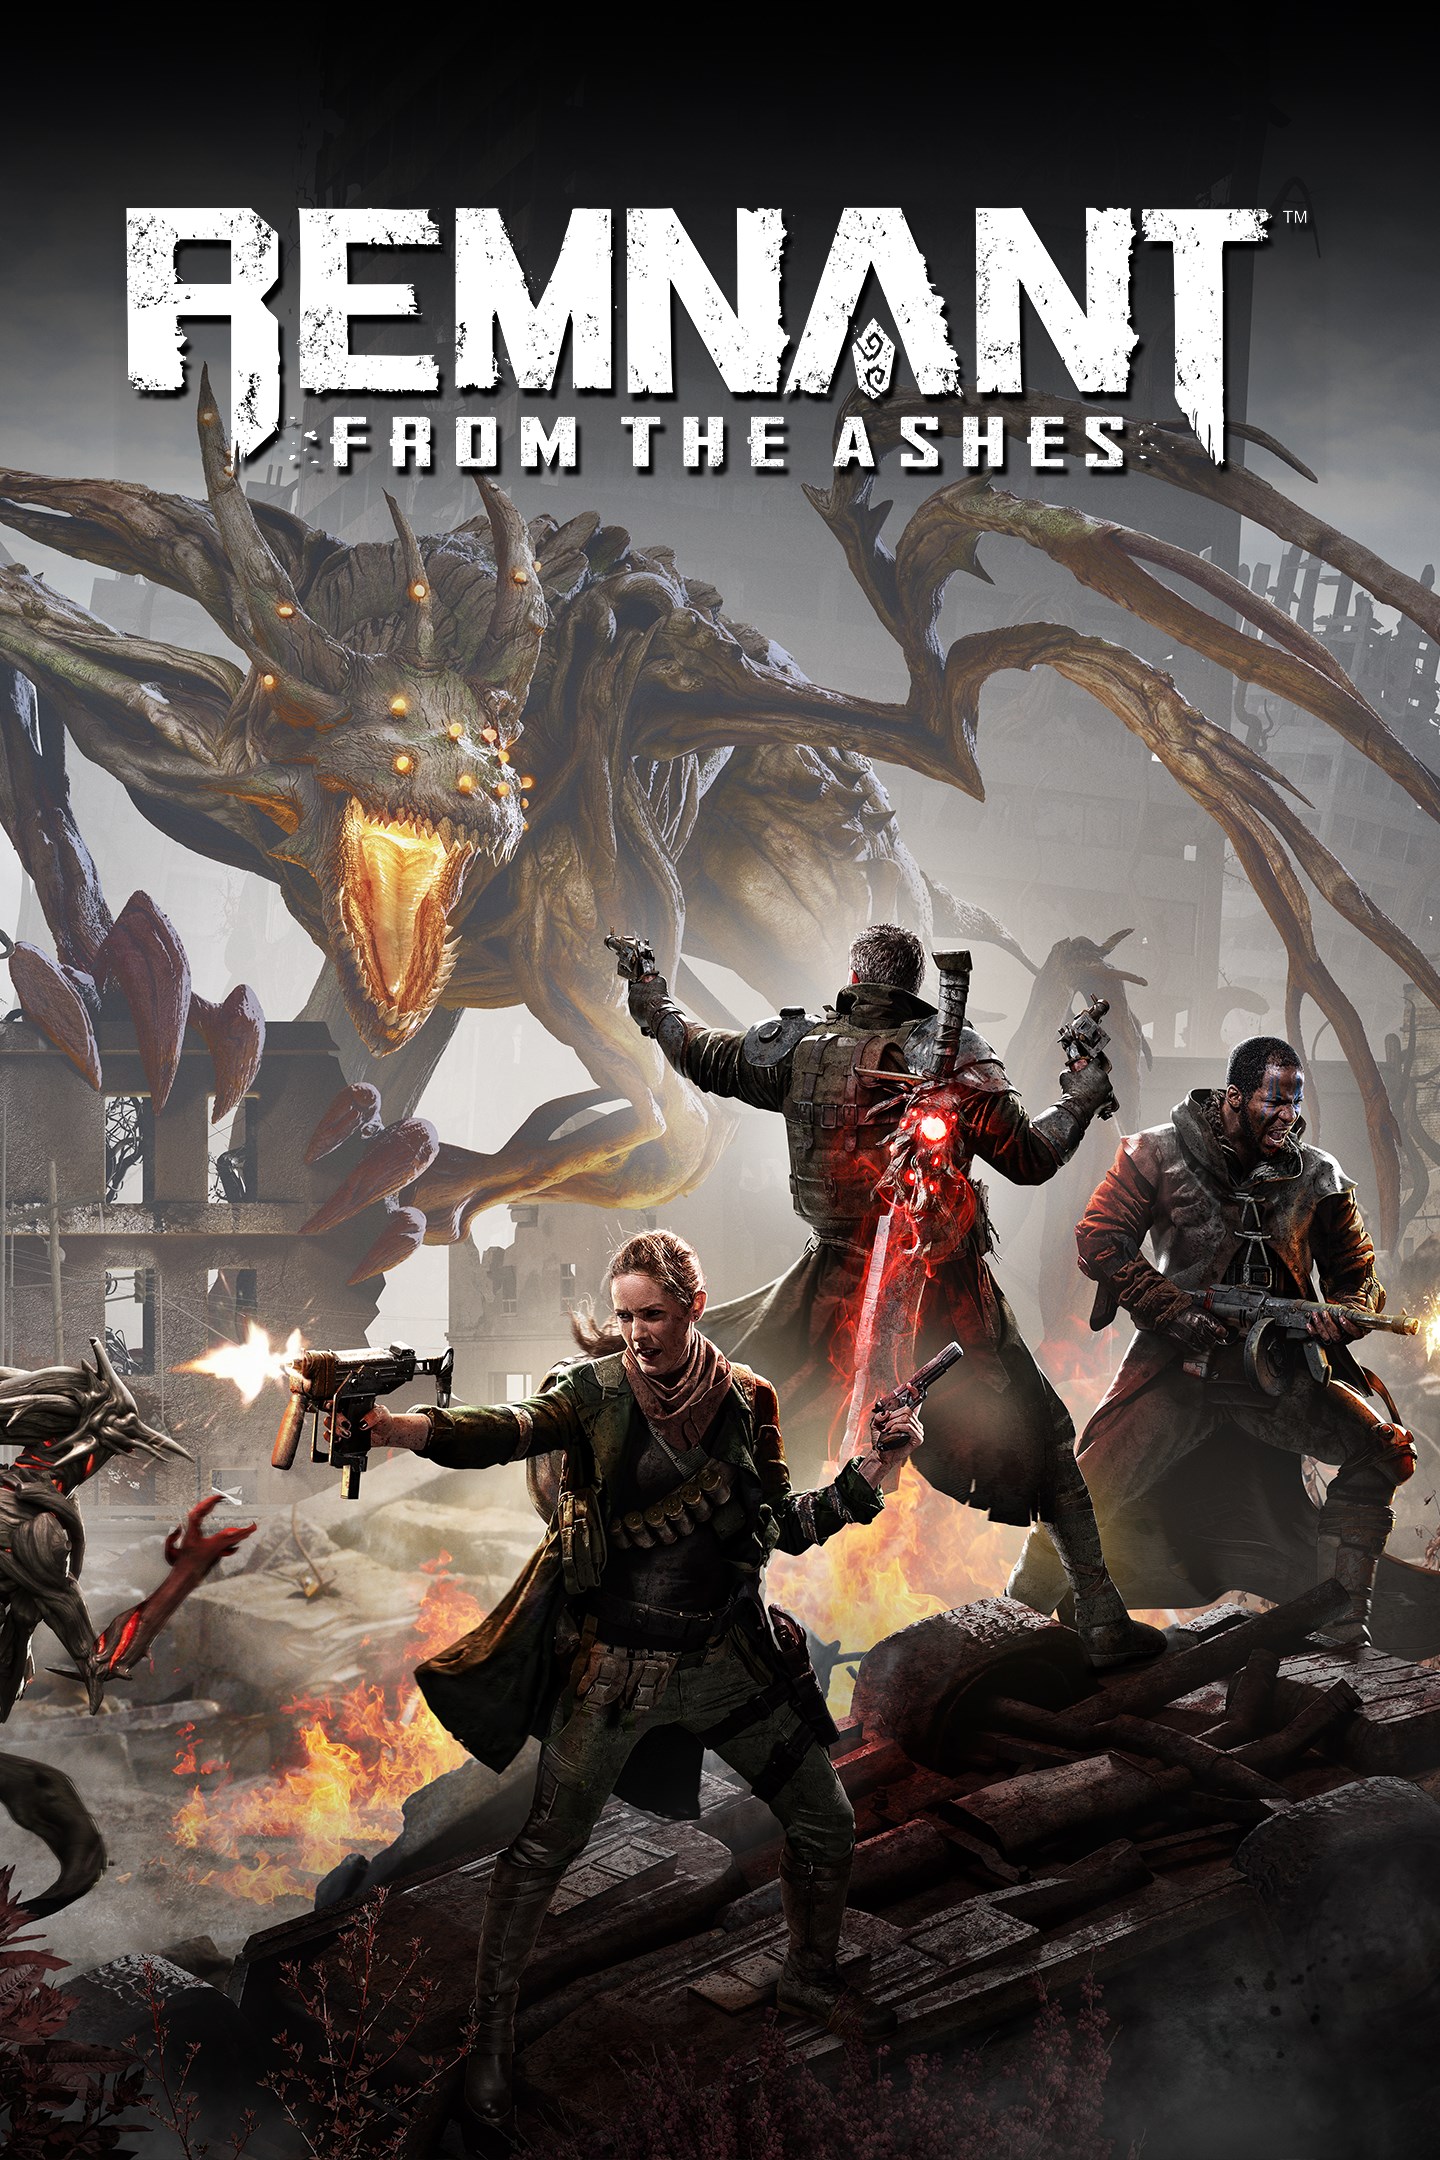 Remnant From The Ashes - Remnant: From the Ashes Adds Absurdly Difficult Hardcore Mode : As one of the last remnants of humanity, you'll set out alone or alongside up to two other players to face down hordes of deadly enemies and epic bosses, and try to.